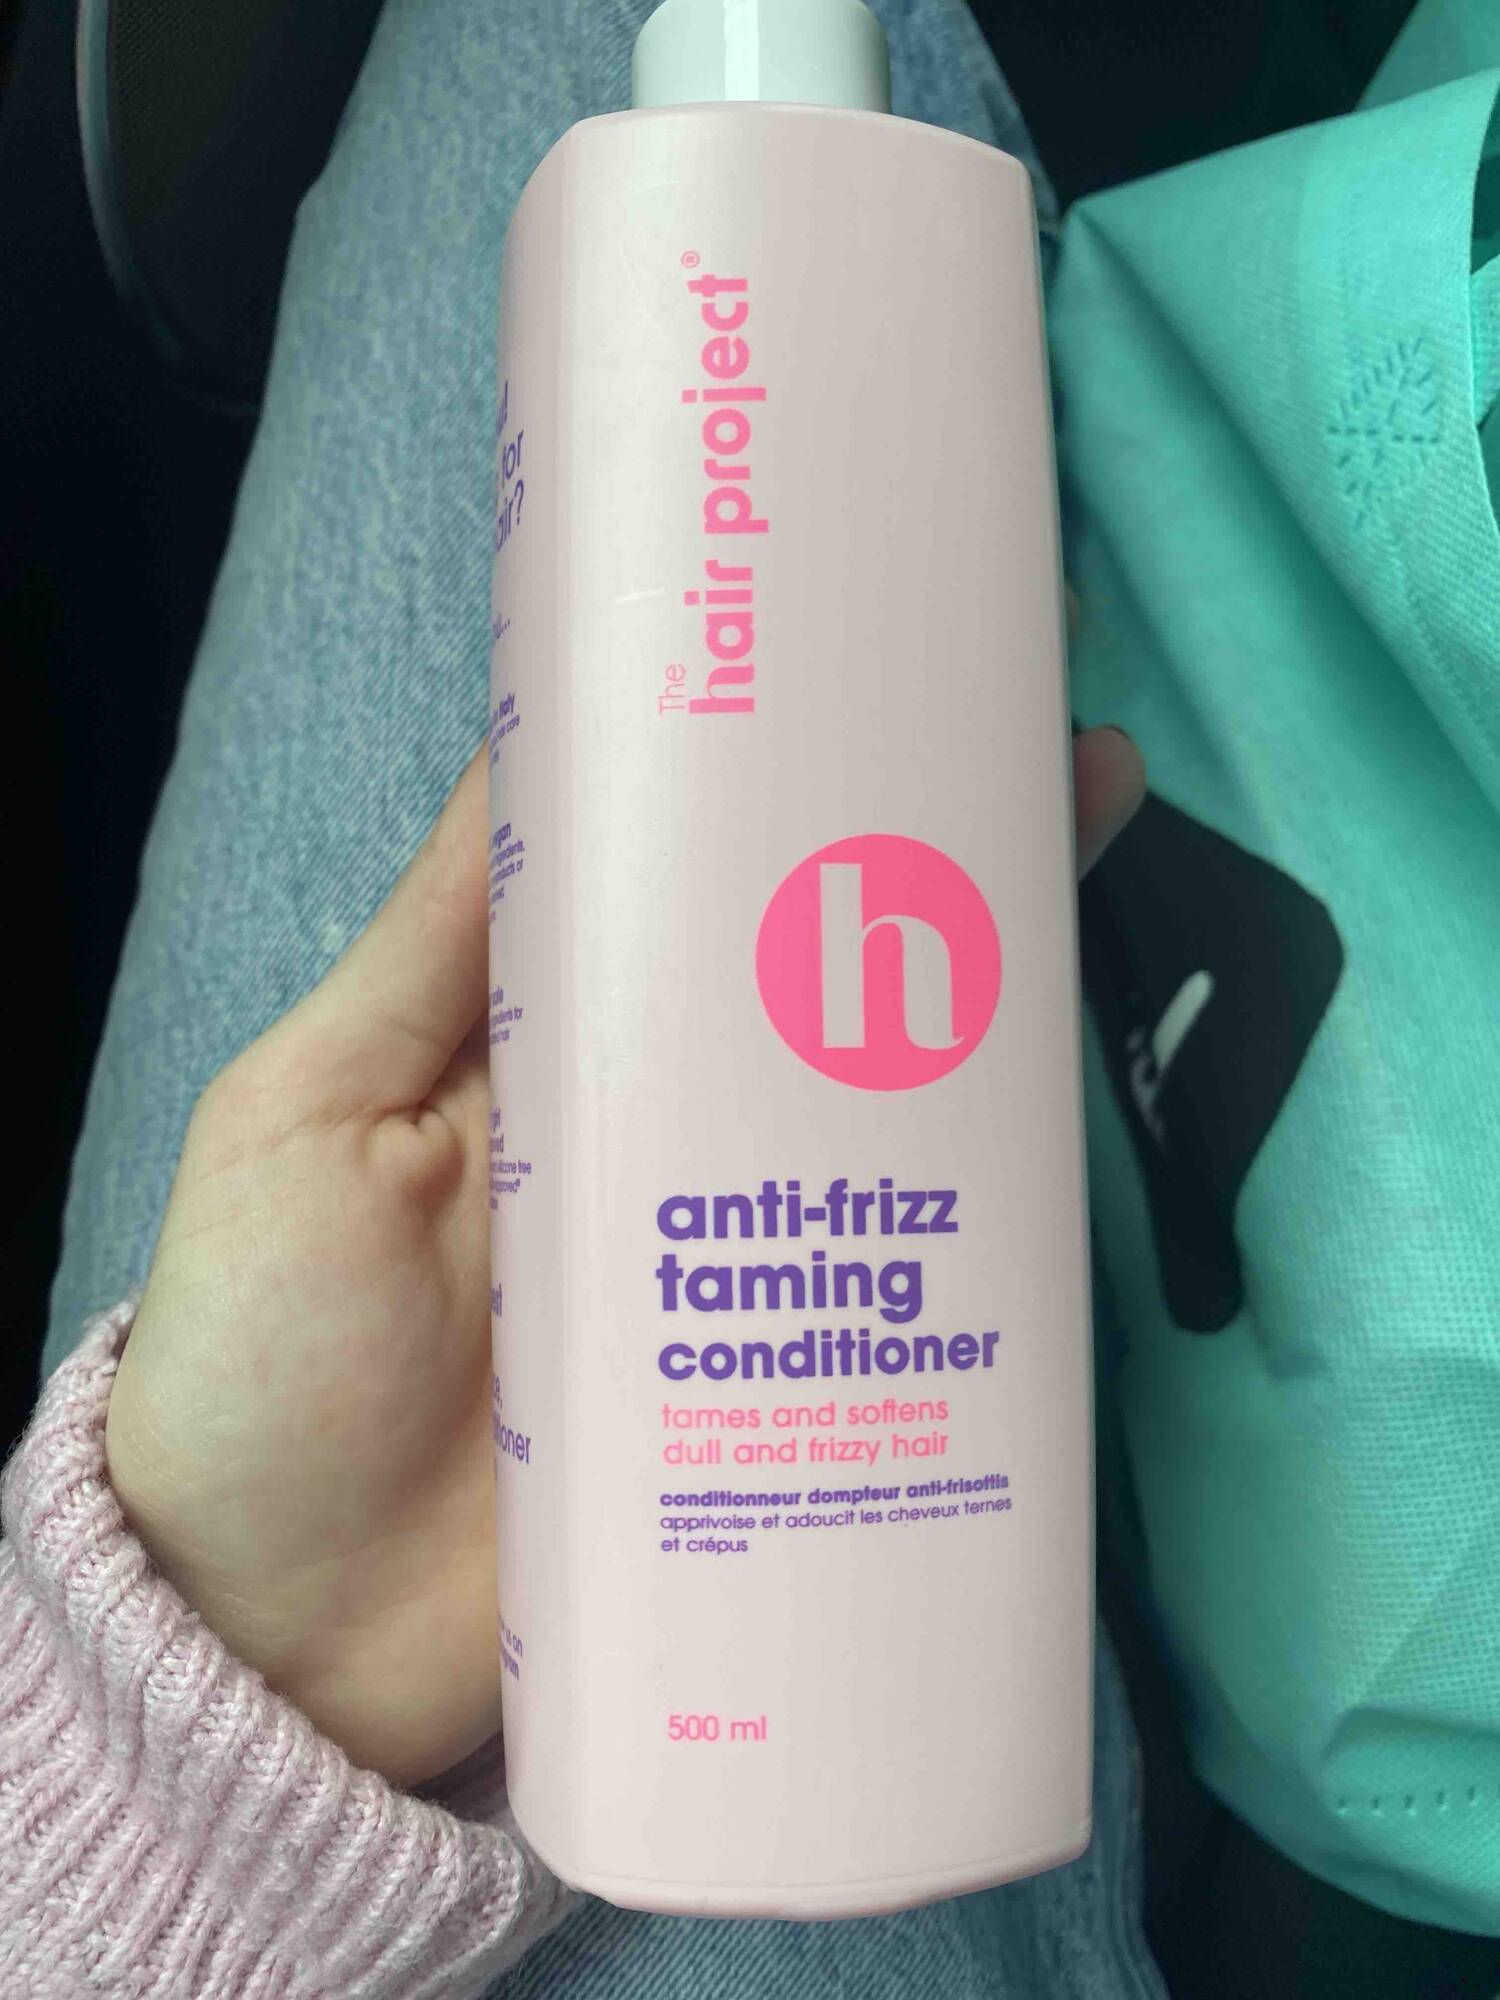 THE HAIR PROJECT - Anti-frizz taming conditioner 